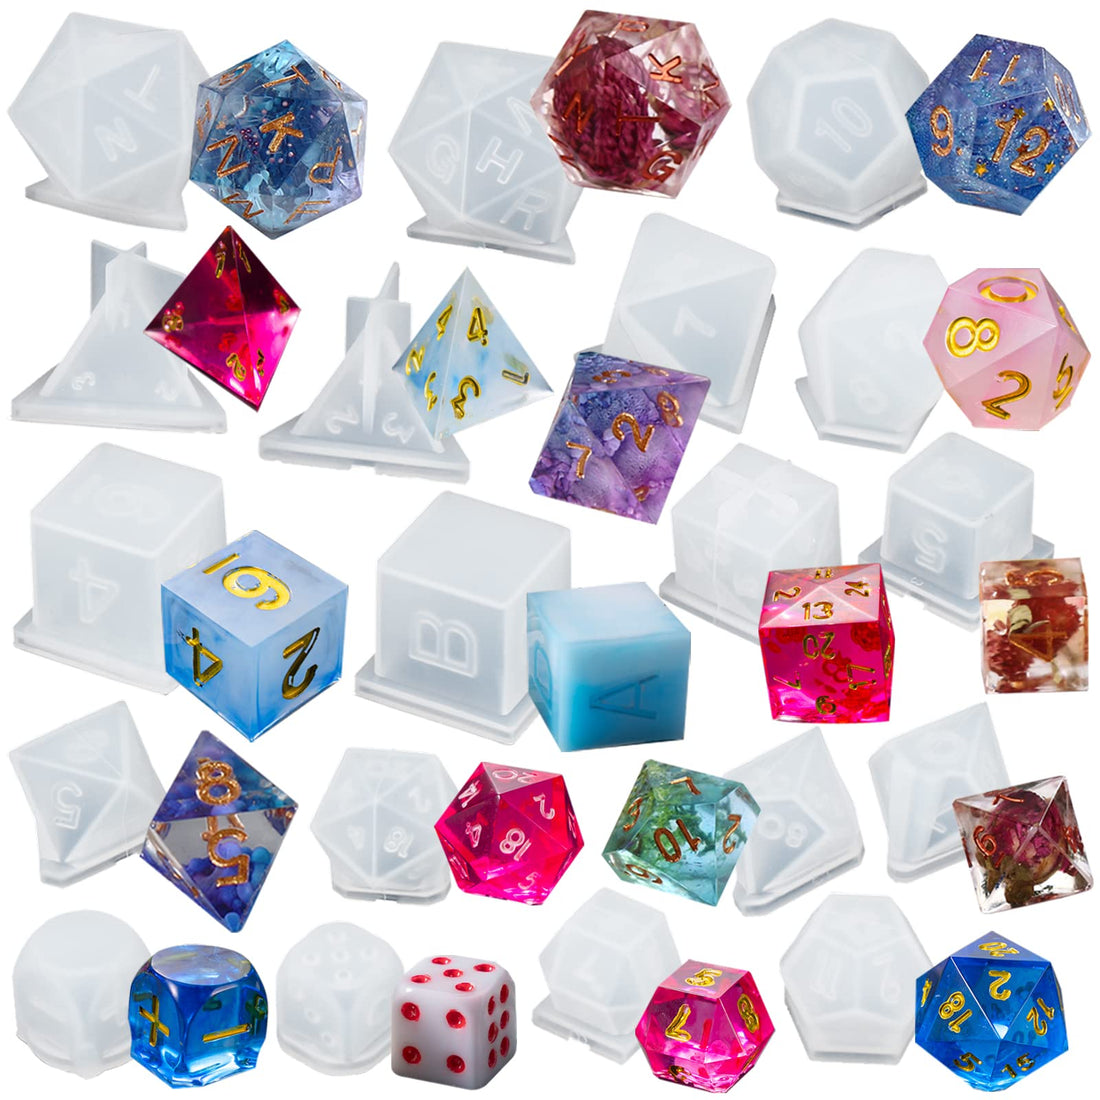 HWSFYES 7 Shapes Dice Molds for Resin, with Silicone Treasure Storage Box Mold Dice Box Mold Polyhedral Dice Mold Dice Making Mold for Epoxy Resin Casting